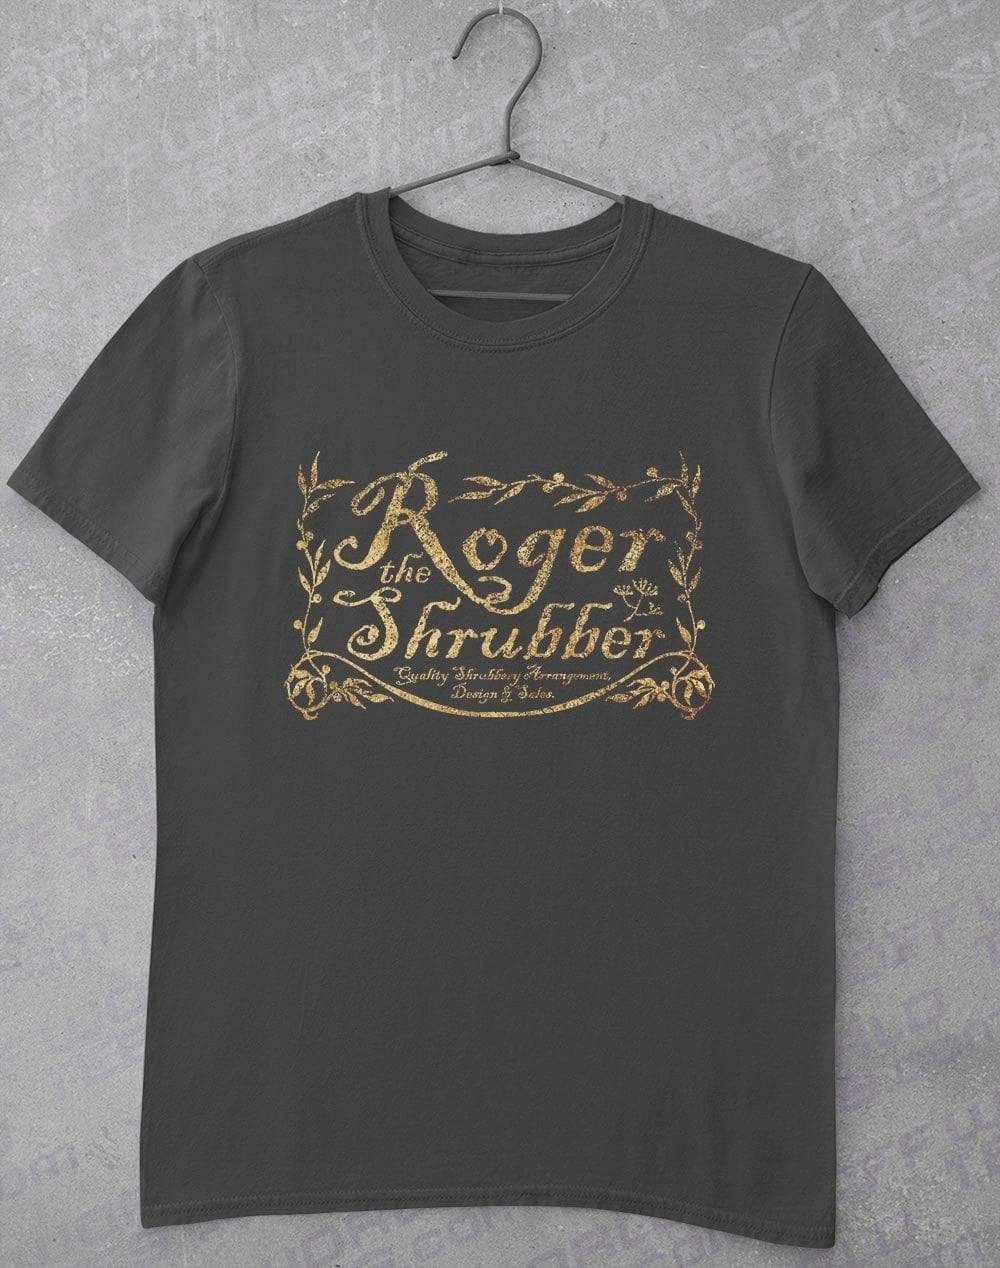 Roger the Shrubber T-Shirt S / Charcoal  - Off World Tees